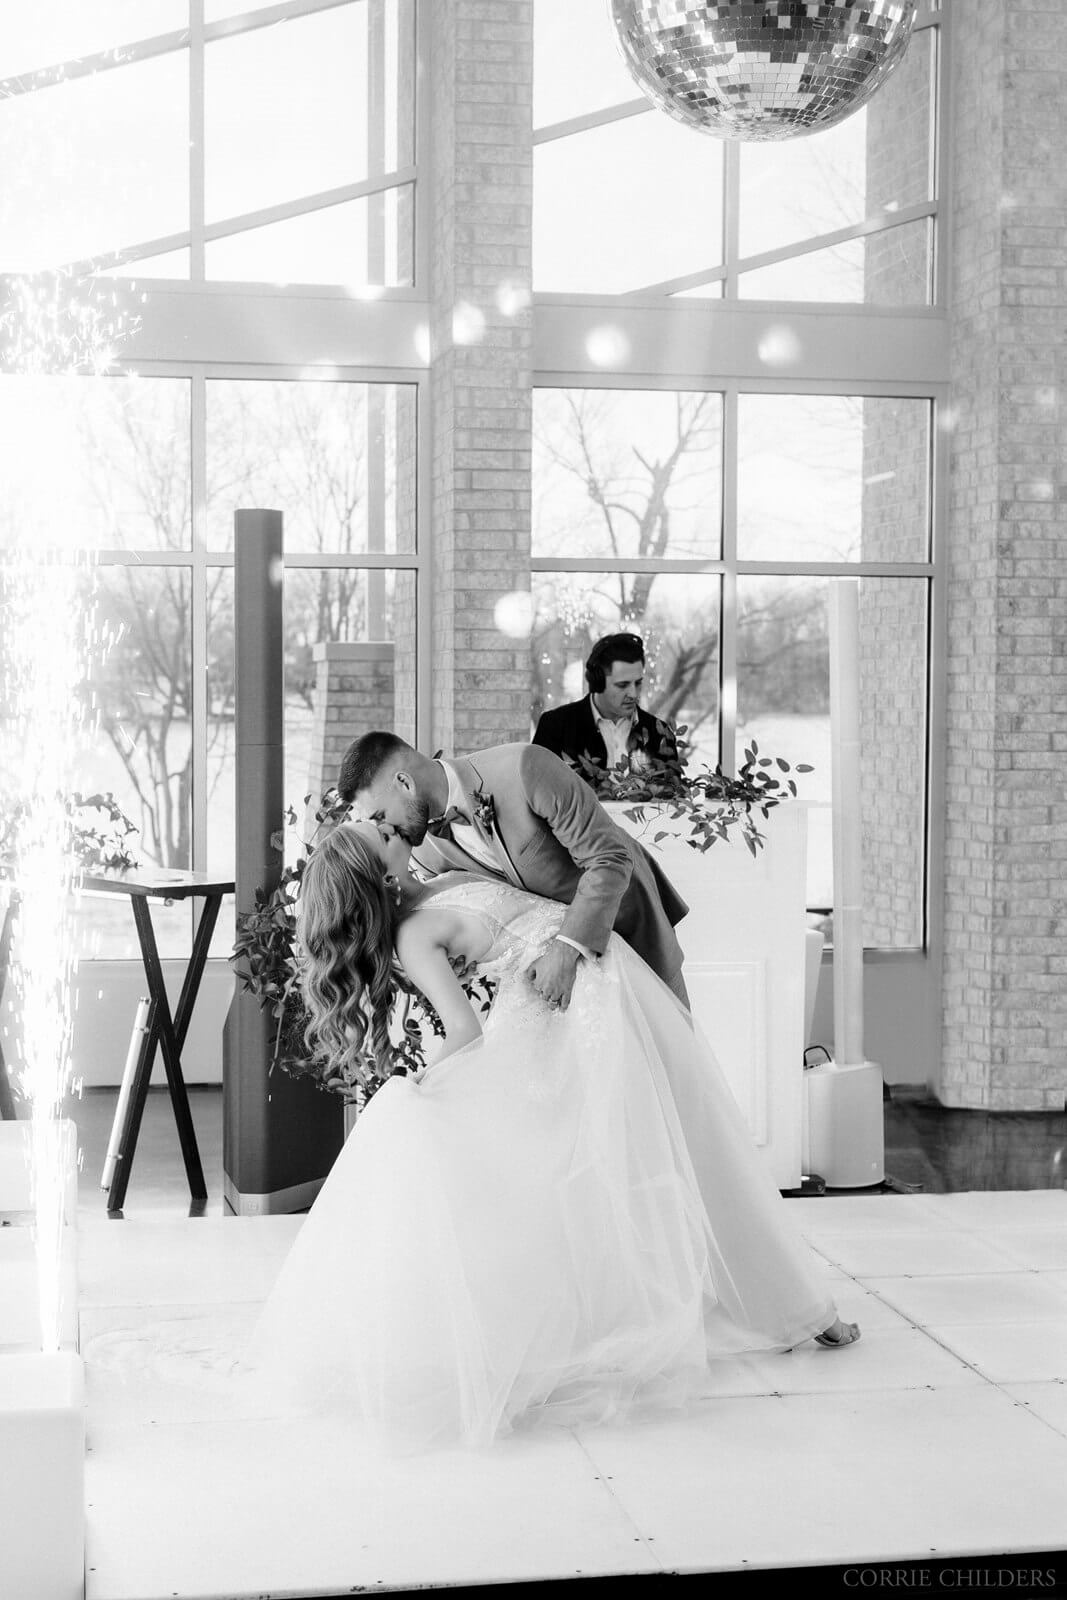 Groom dipping bride, kissing on the dance floor with Ozark Mix DJ booth in background